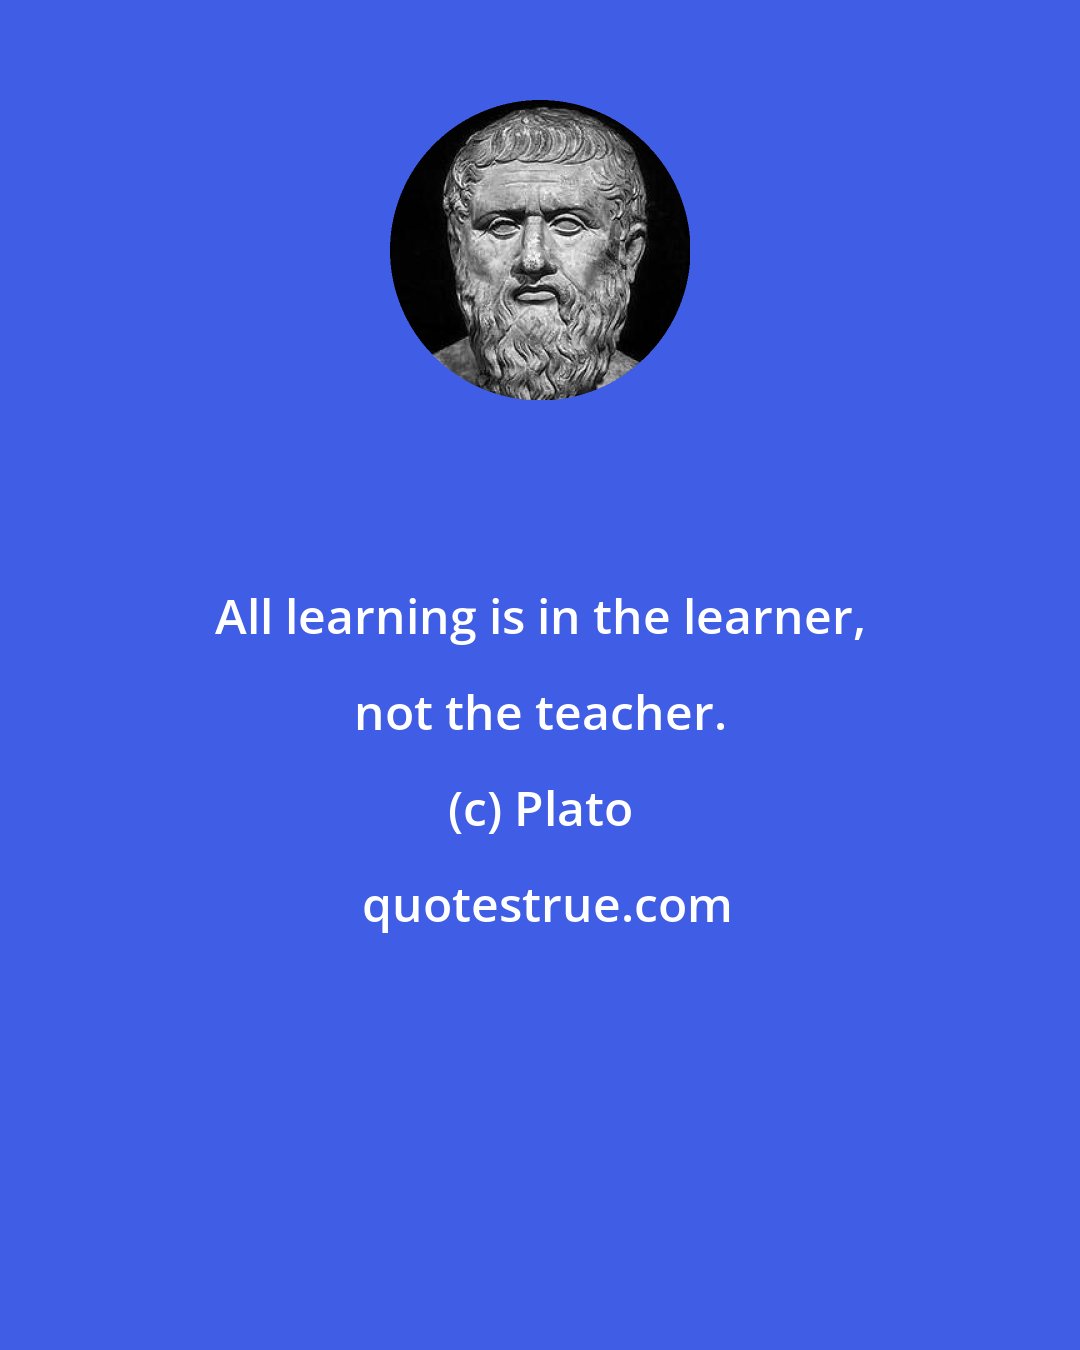 Plato: All learning is in the learner, not the teacher.